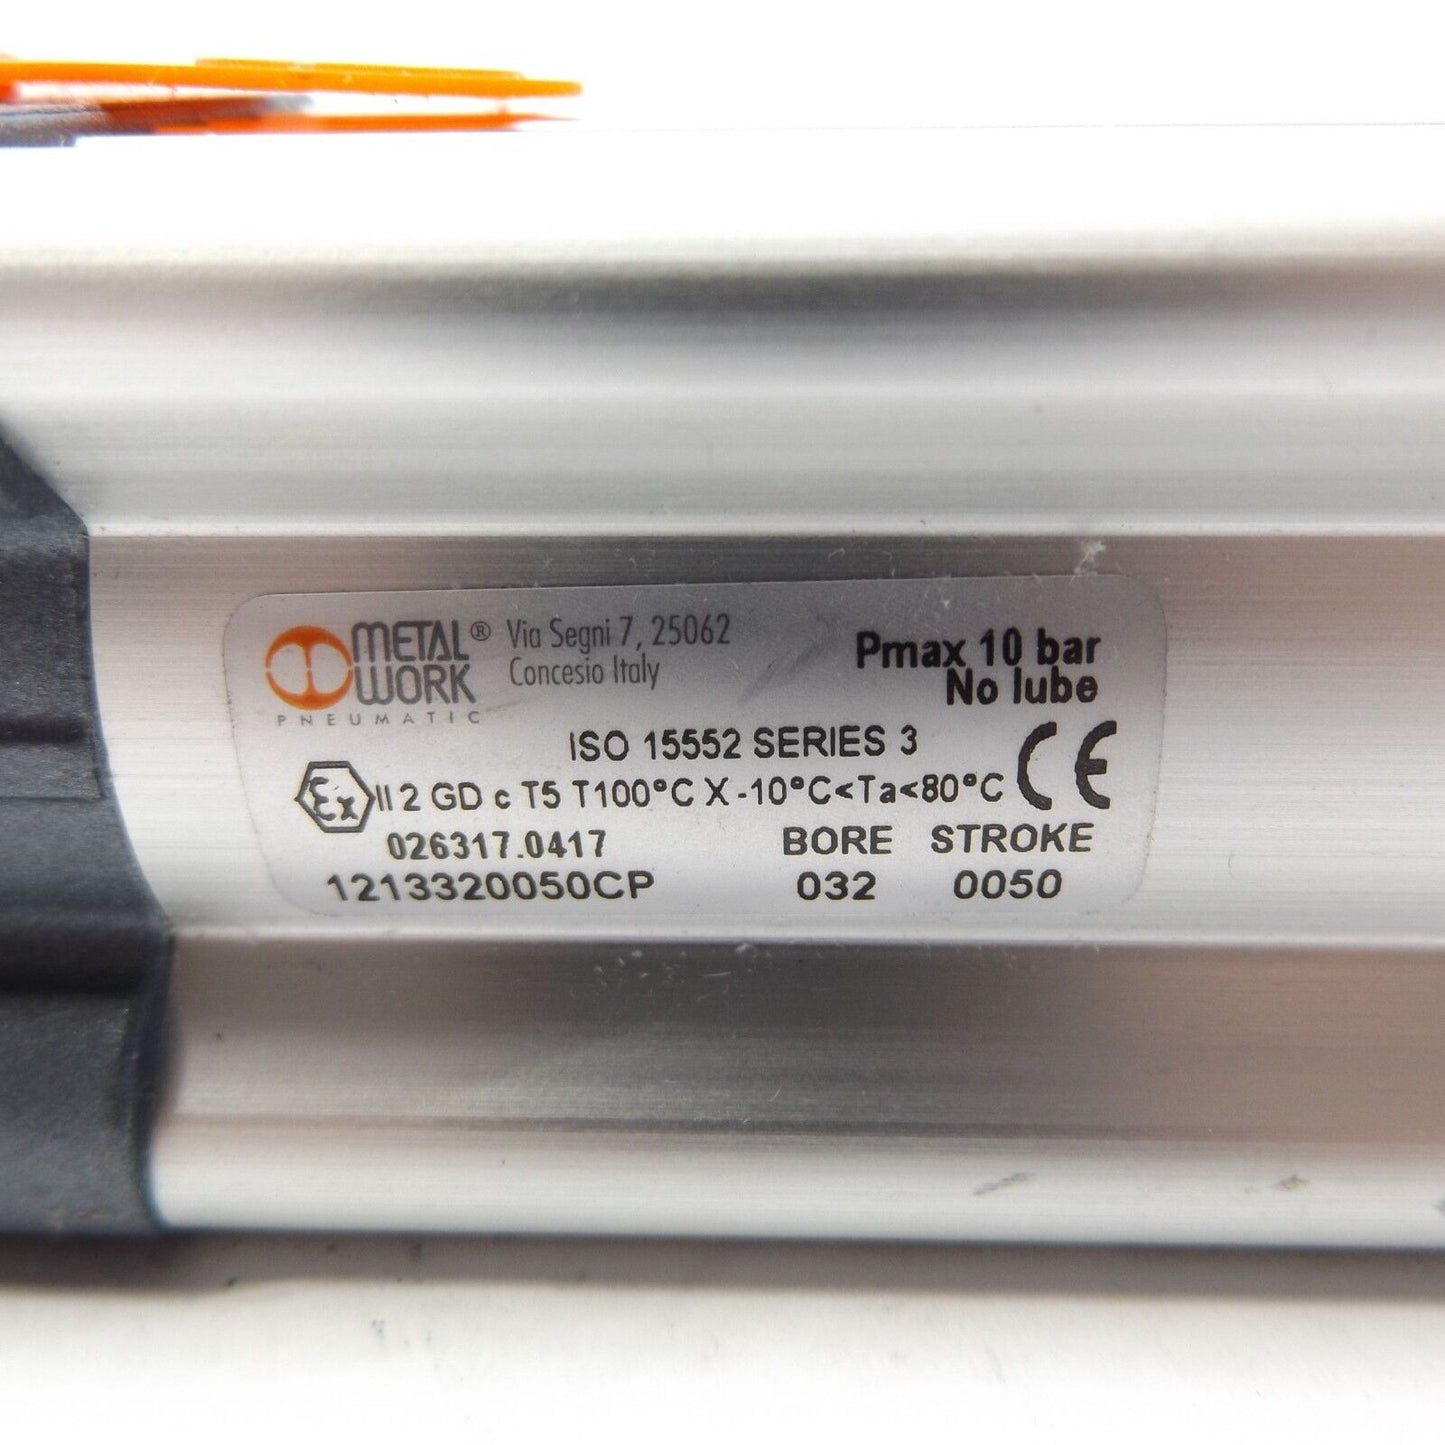 METAL WORK 1213320050CP ISO 15552 SERIES PNEUMATIC CYLINDER